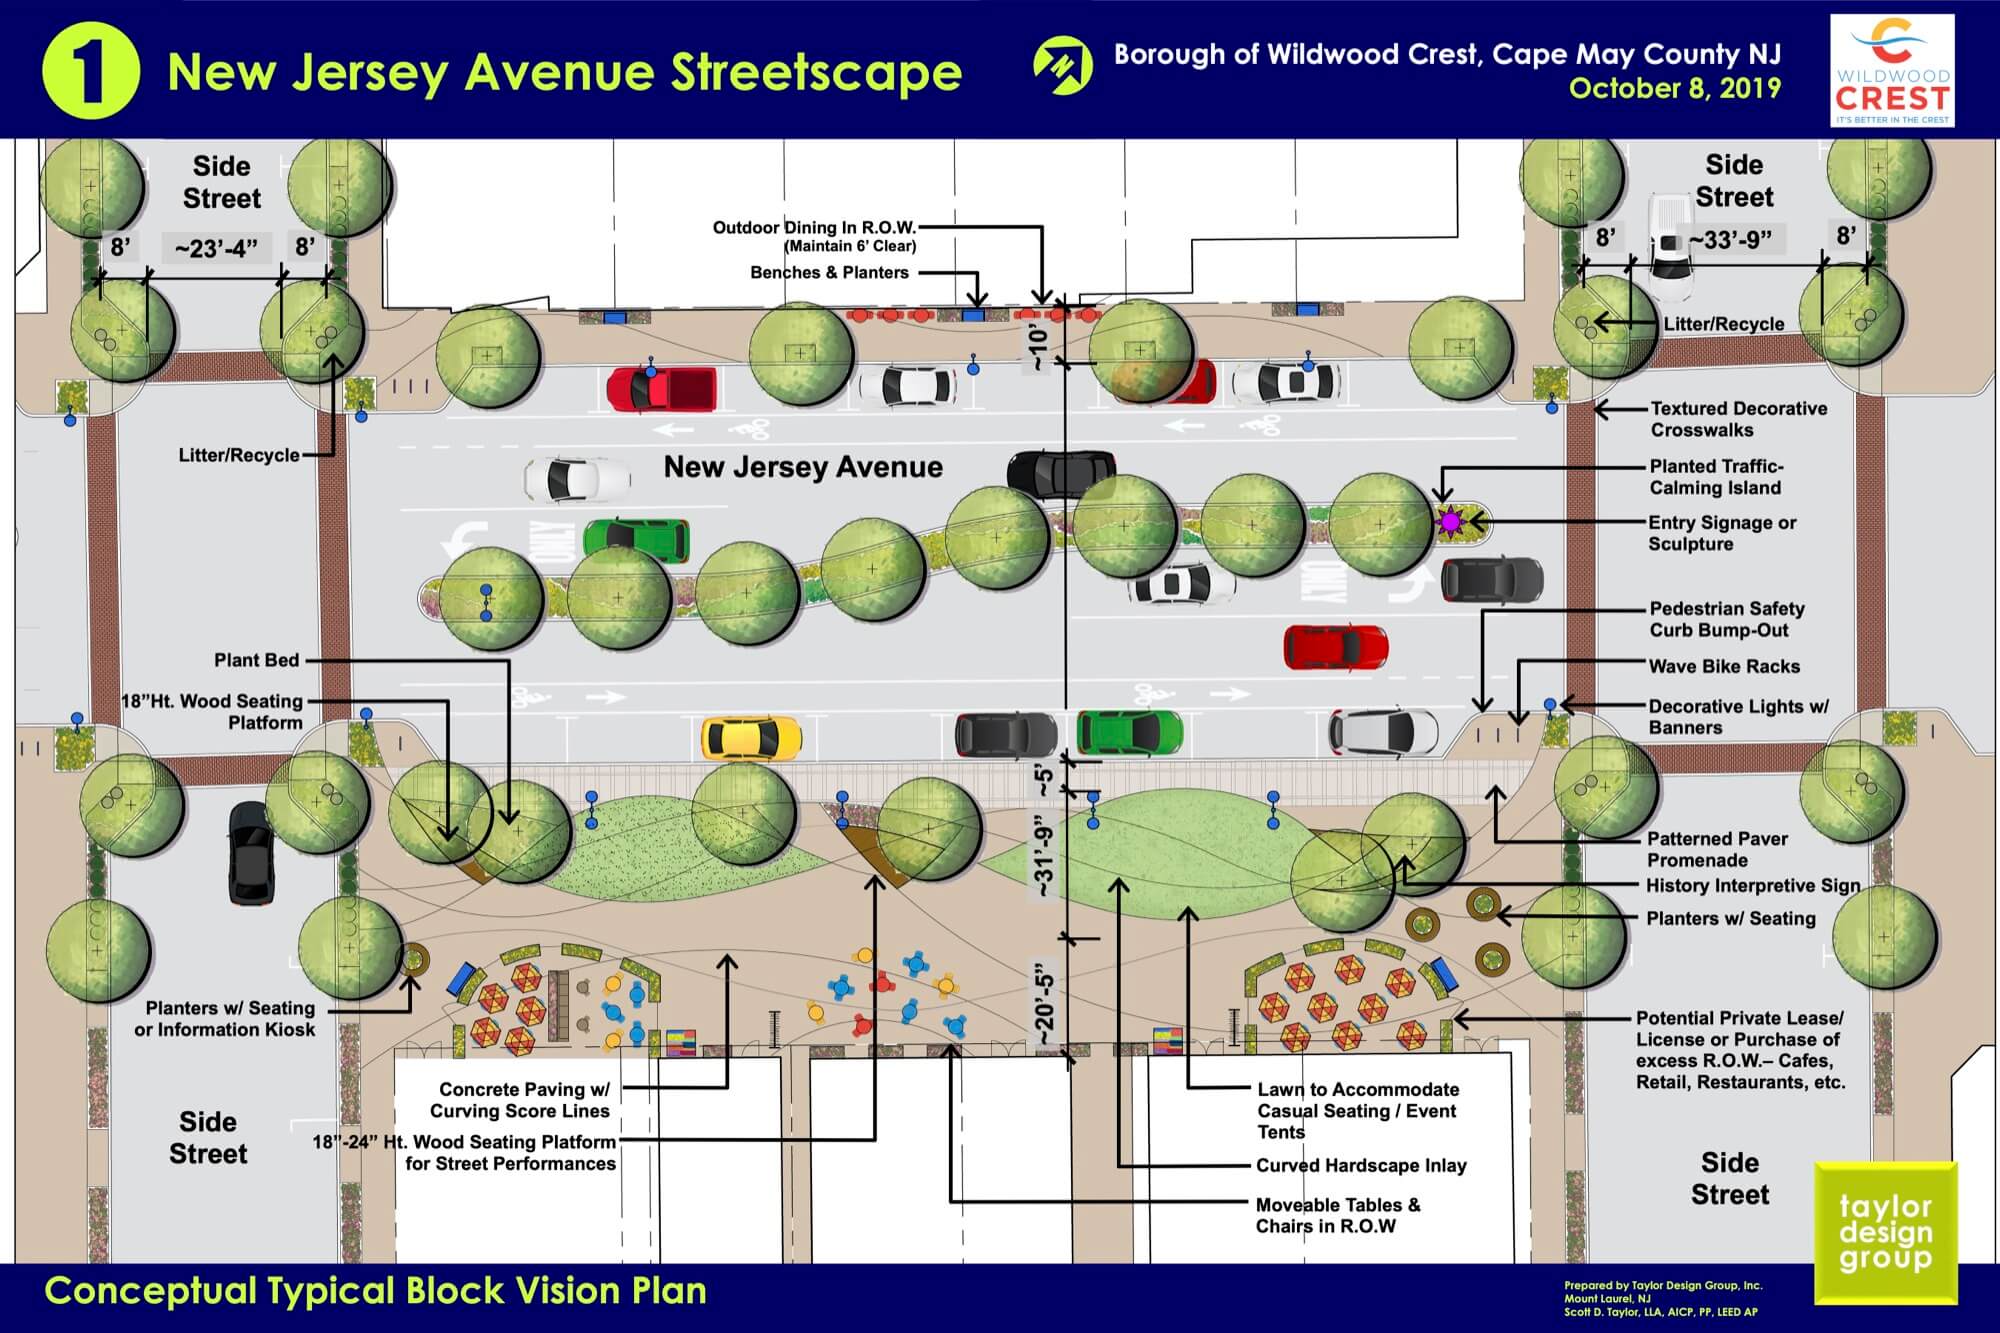 An artist’s rendering of the proposed overhaul of New Jersey Avenue in the Wildwood Crest business district. The borough hopes that the improvements will help stimulate investment in the area.